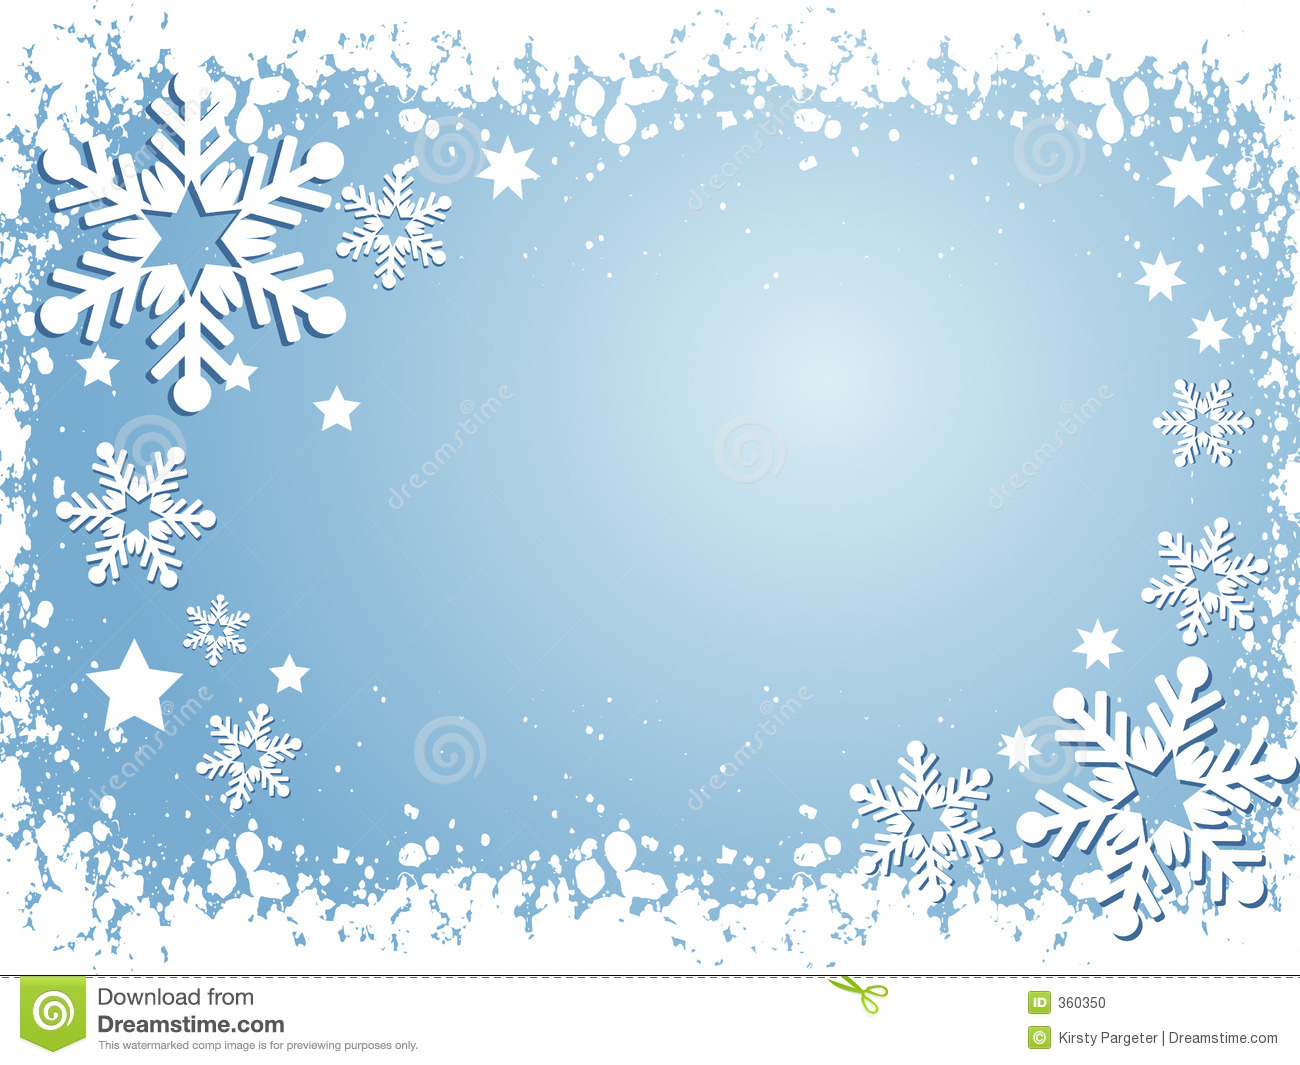 Themed Background With Snowflakes And Stars Mr No Pr No 5 12223 67